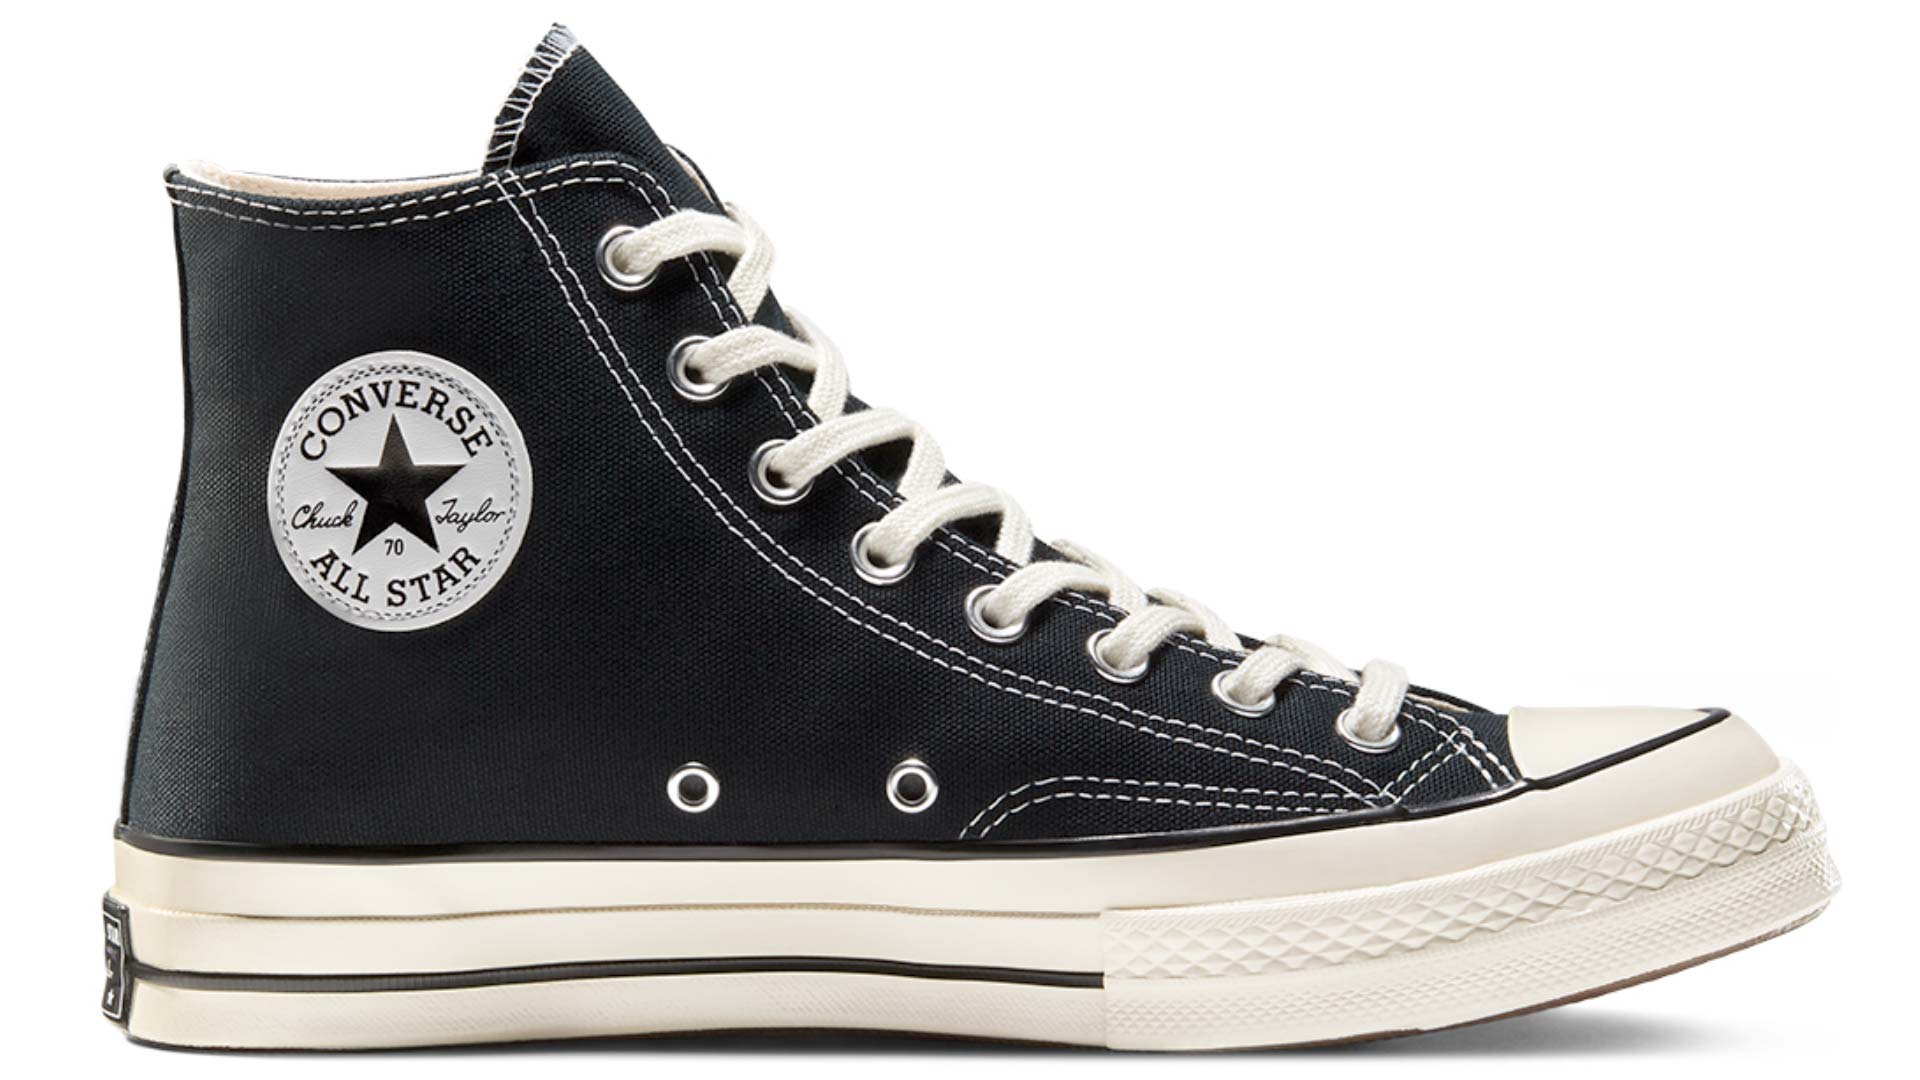 converse most popular shoes